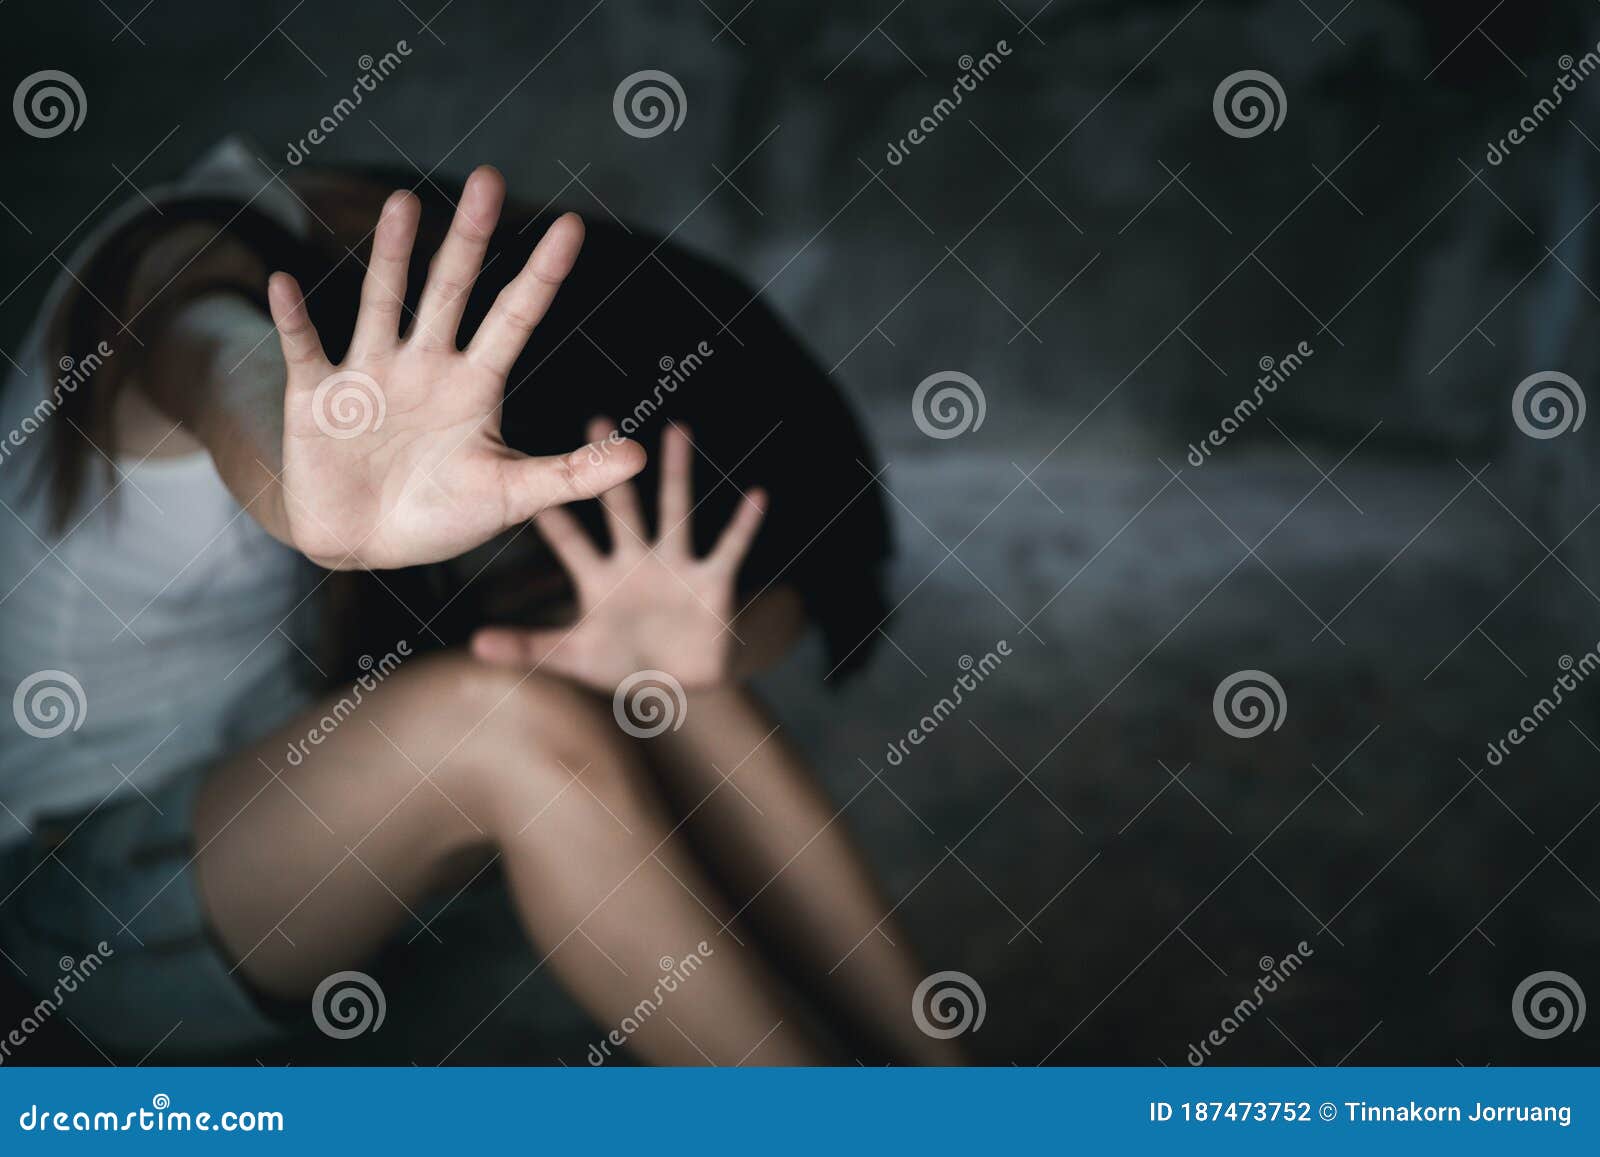 Woman Raised Her Hand for Dissuade, Stop Sexual Abuse and Concept, Stop Violence Against Women, International Women`s Day Stock Photo